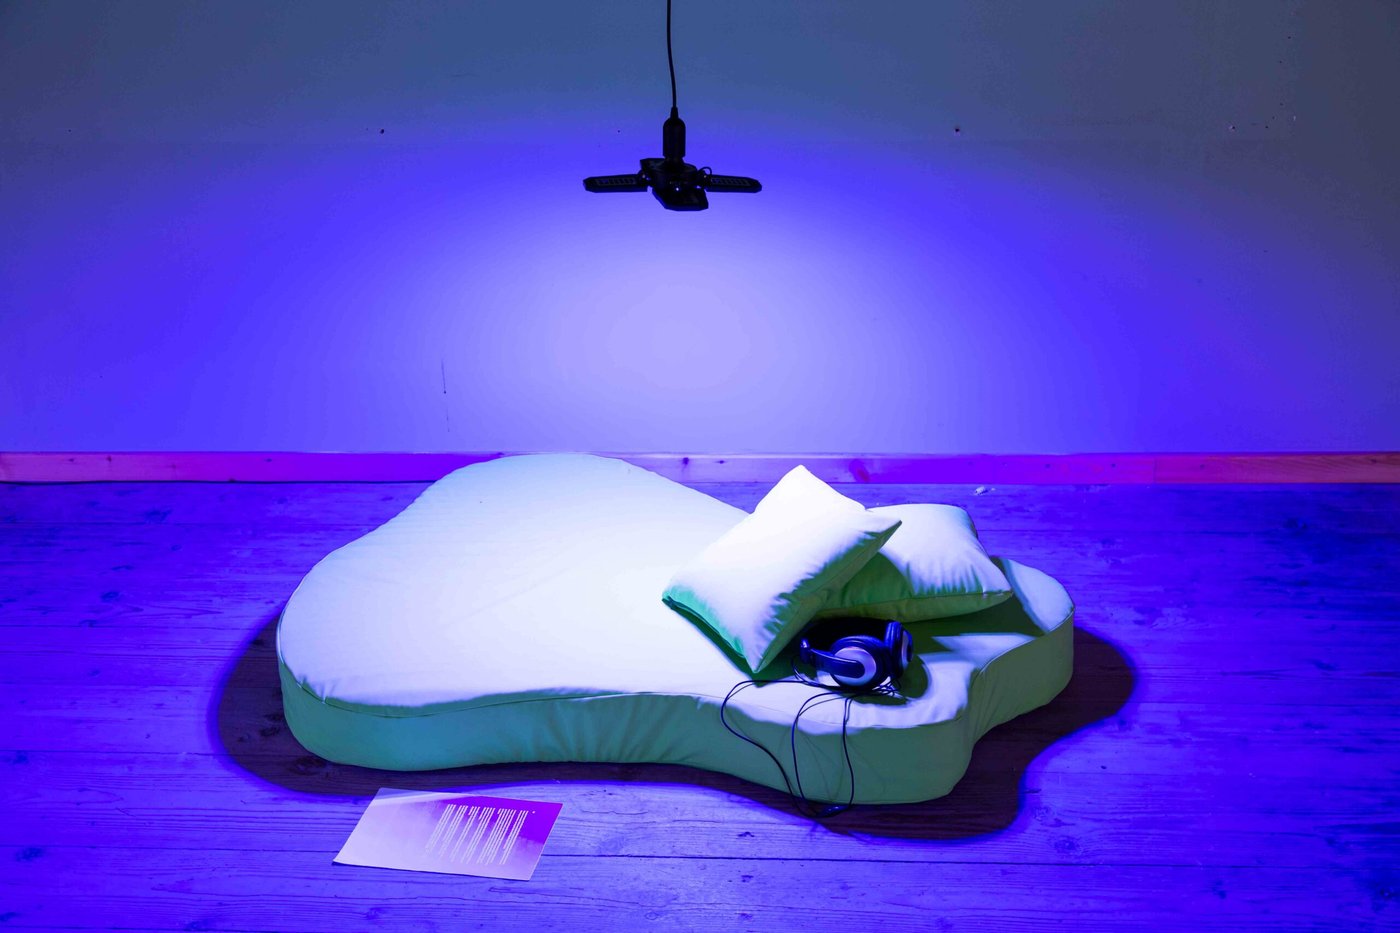 Matress an pillows on the floor with headphones on the side, in a blue lieght